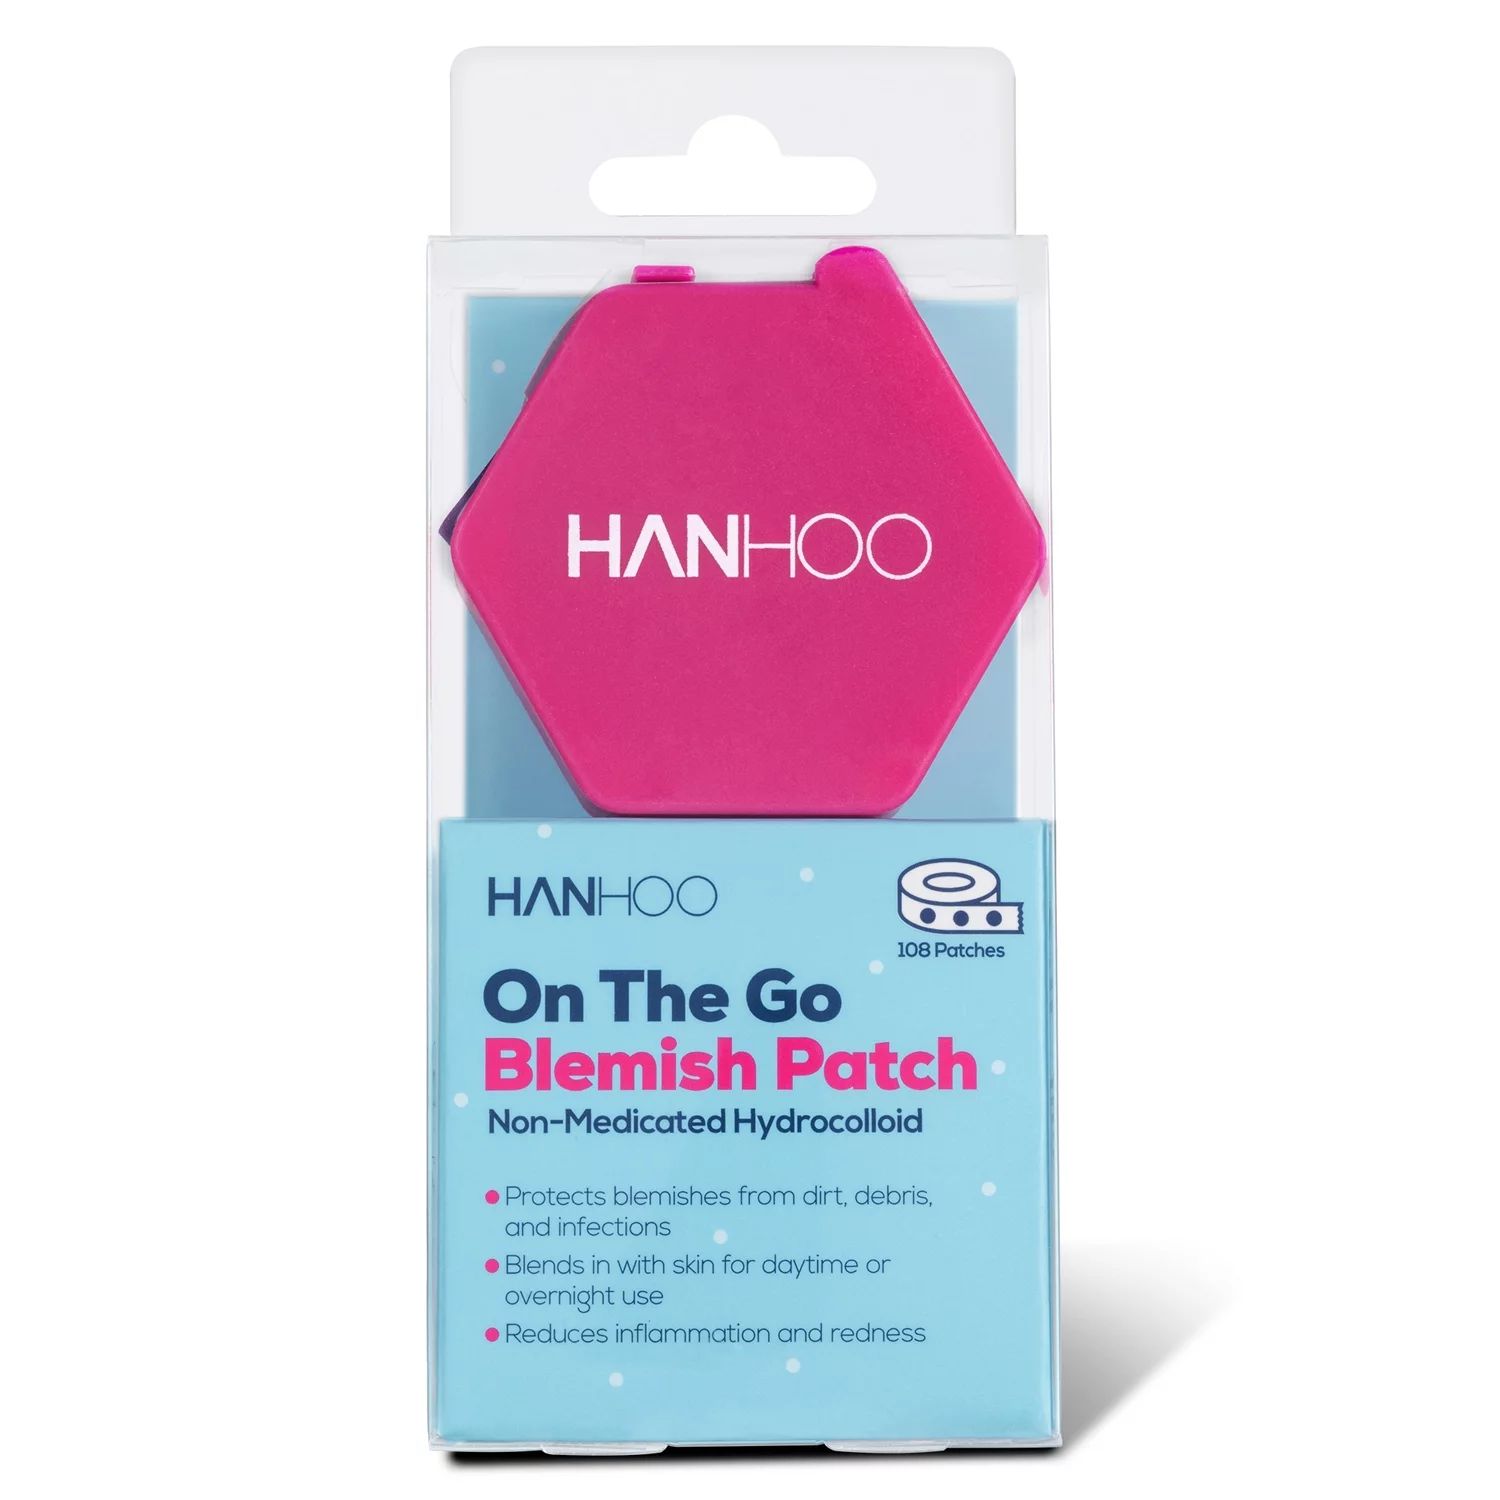 Hanhoo On The Go Blemish Patch Roll with Hydrocolloid, For All Skin Types, Acne Treatment,108 Ct ... | Walmart (US)